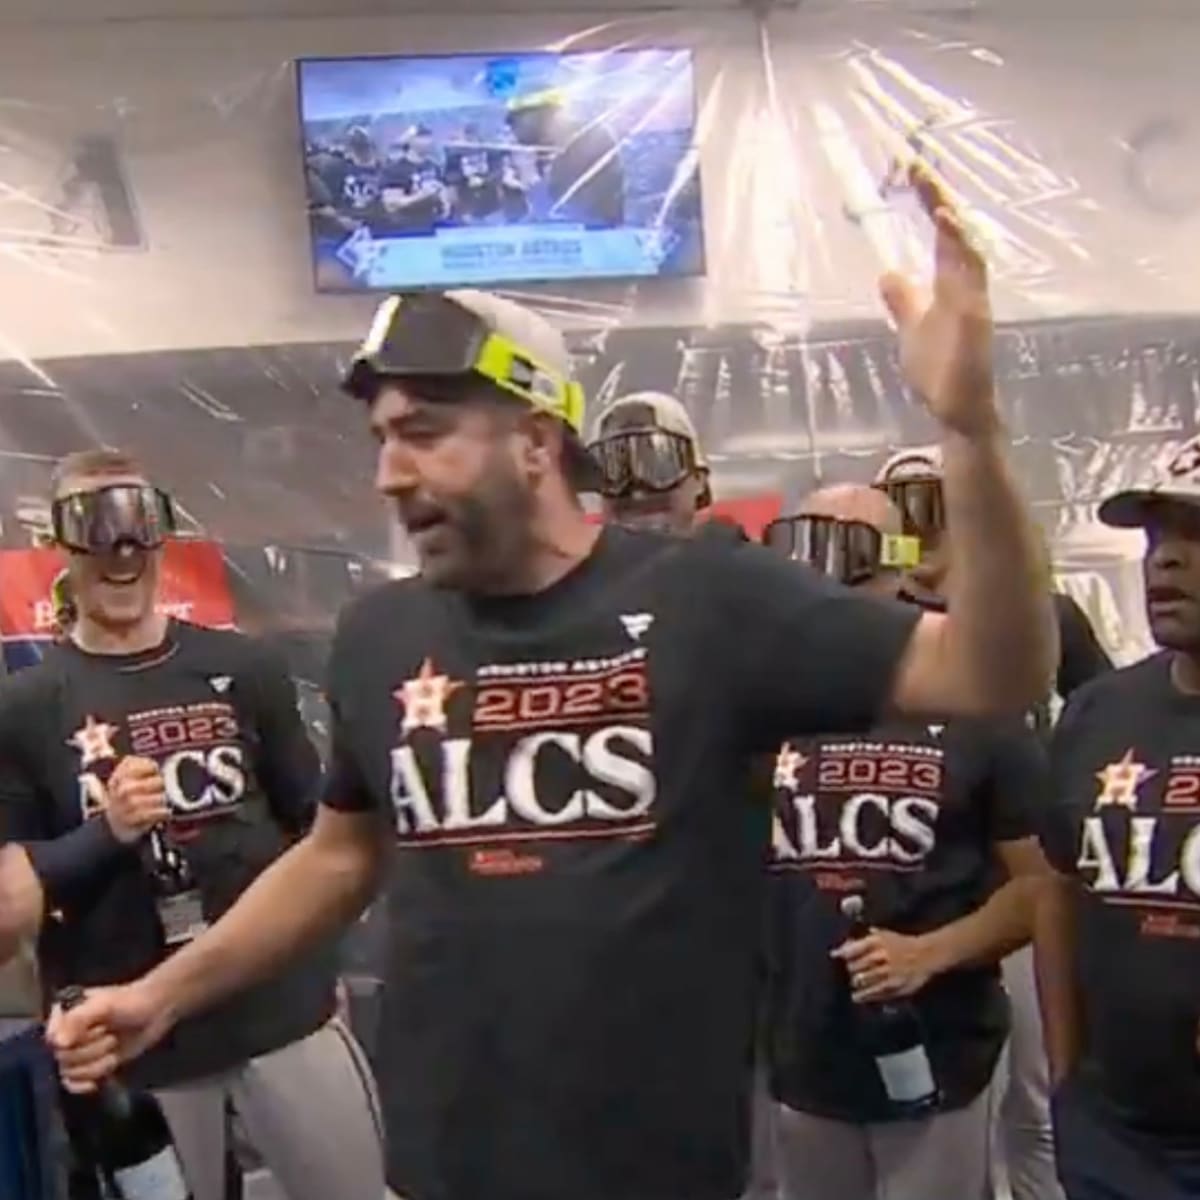 Justin Verlander Chugs From the Trophy, Jeremy Peña FaceTimes Mom